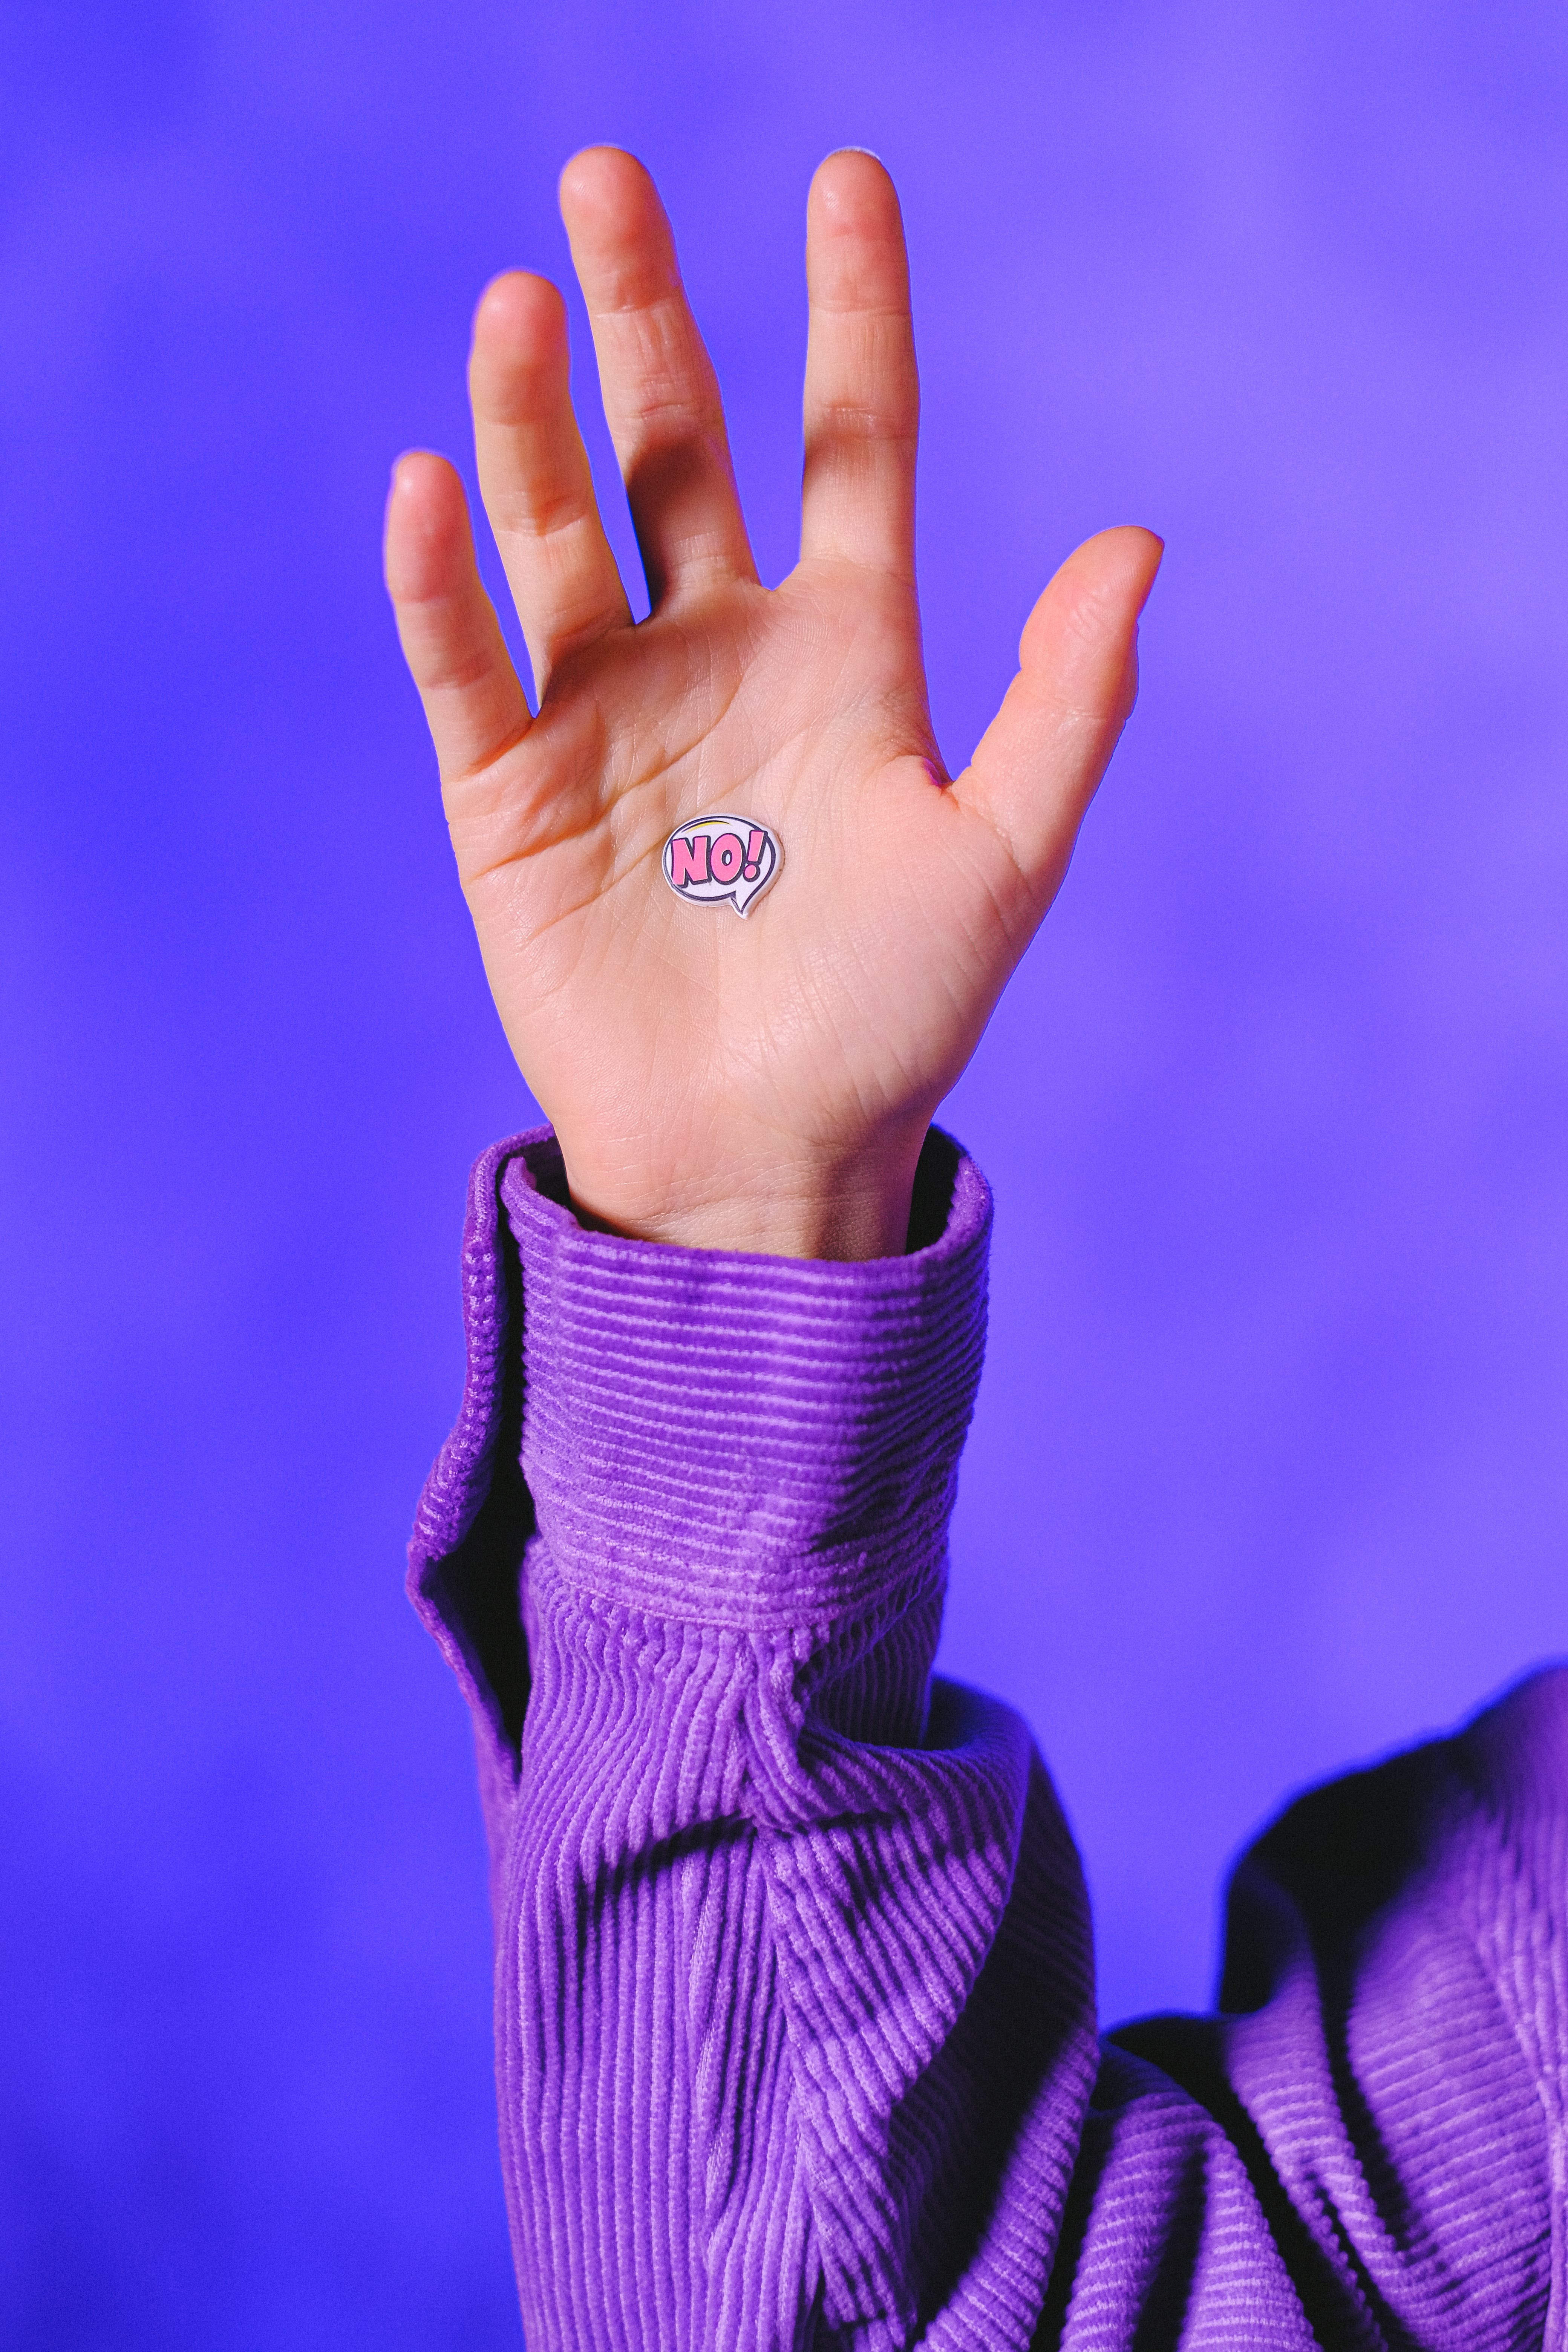 A close up of the raised hand of a person wearing a long sleeved purple shirt, in front of a purple wall, with a small sticker on their palm that reads "No!" in a comic book font.